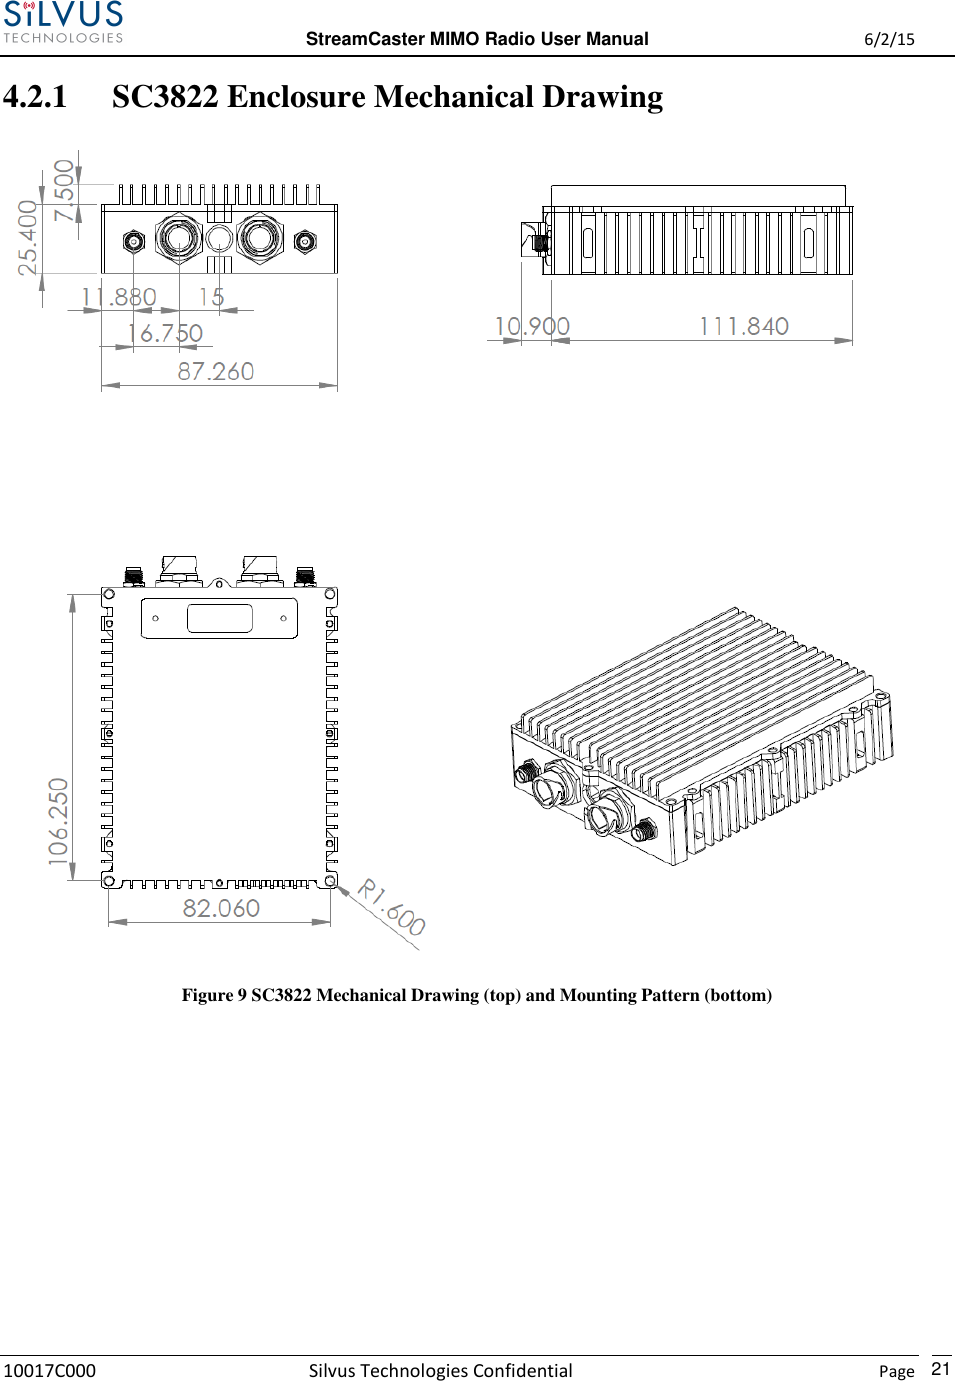  StreamCaster MIMO Radio User Manual  6/2/15 10017C000 Silvus Technologies Confidential    Page   21 4.2.1 SC3822 Enclosure Mechanical Drawing   Figure 9 SC3822 Mechanical Drawing (top) and Mounting Pattern (bottom)  